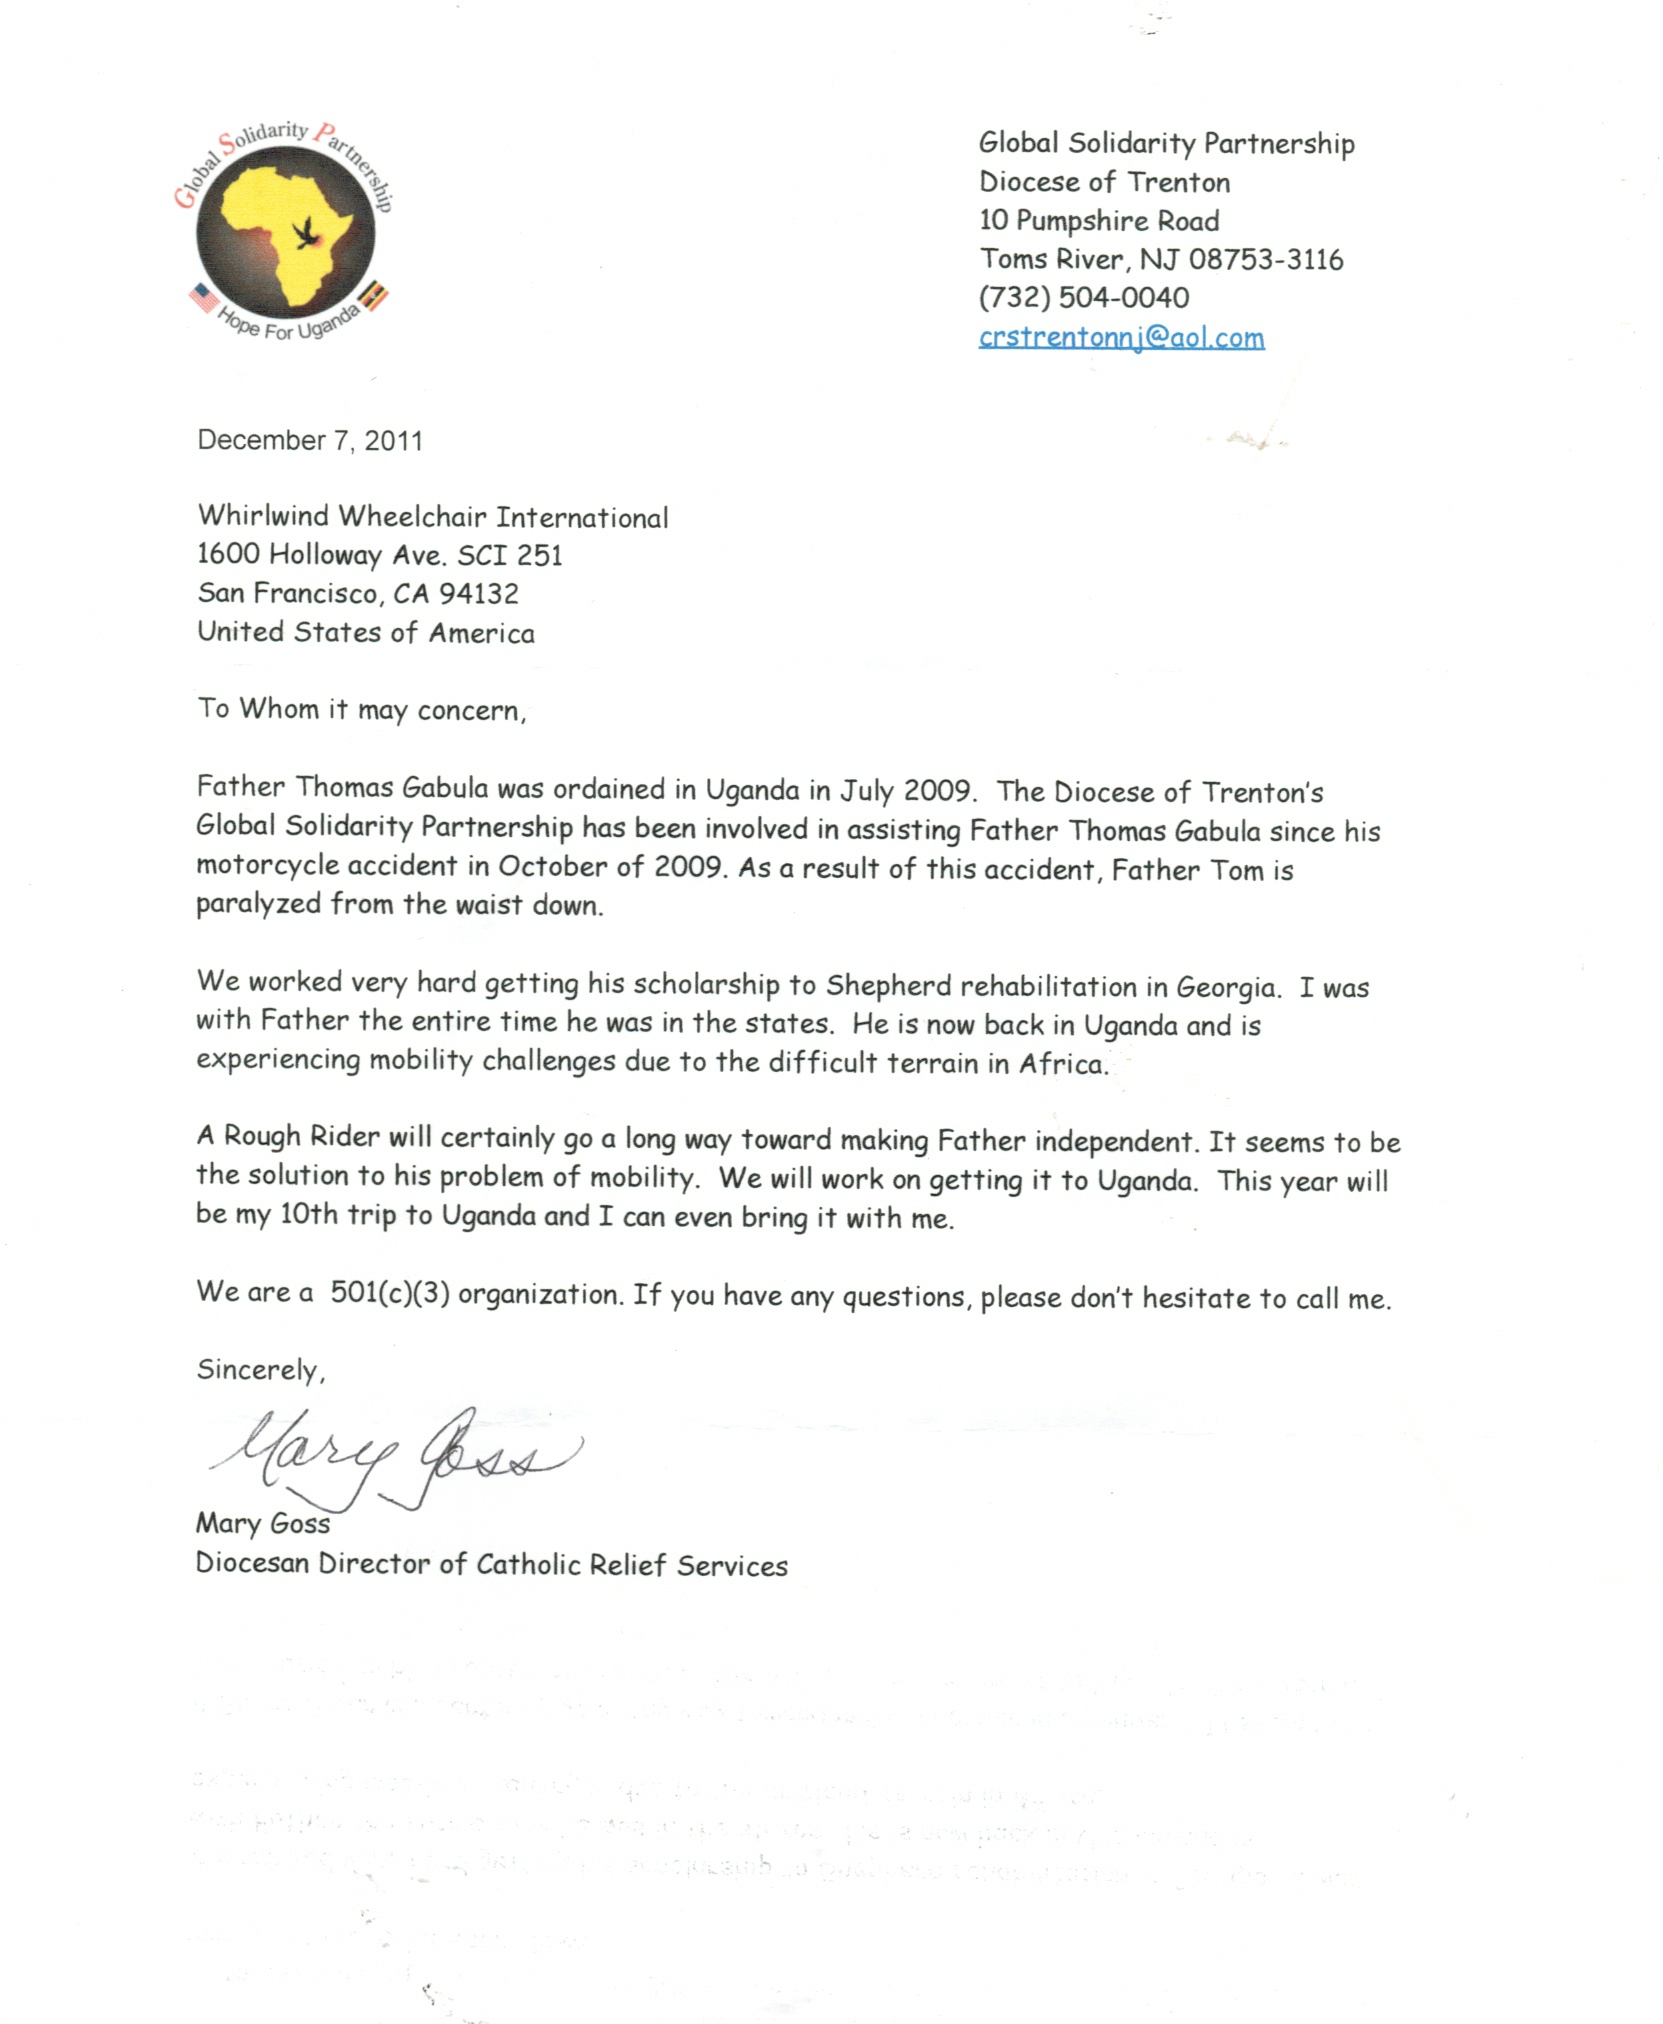 Mission Trip Letter Template - How to Write A Missionary Support Letter Choice Image Letter